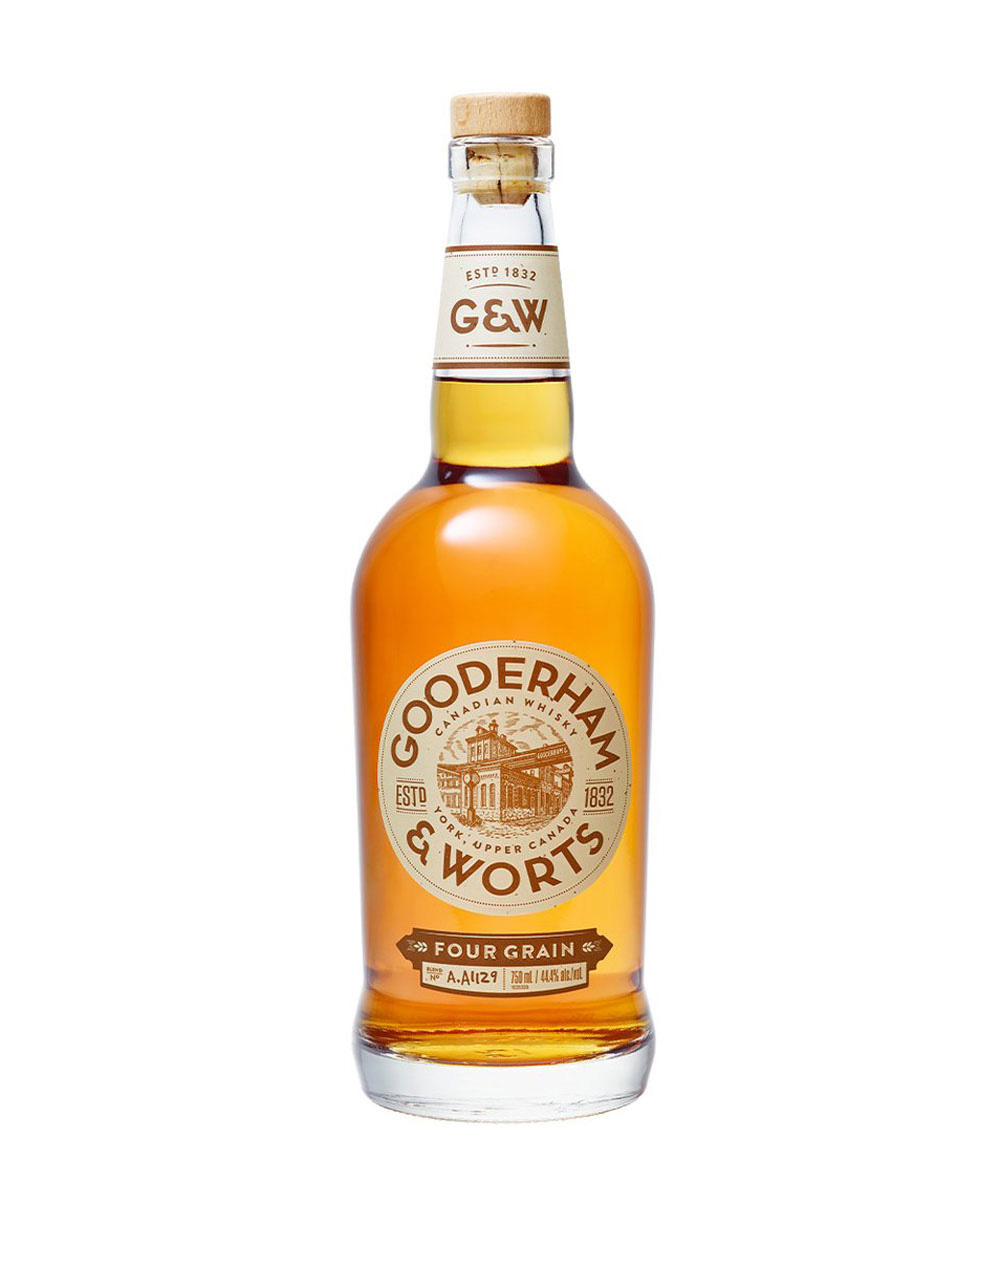 Gooderham and Worts Canadian Whisky